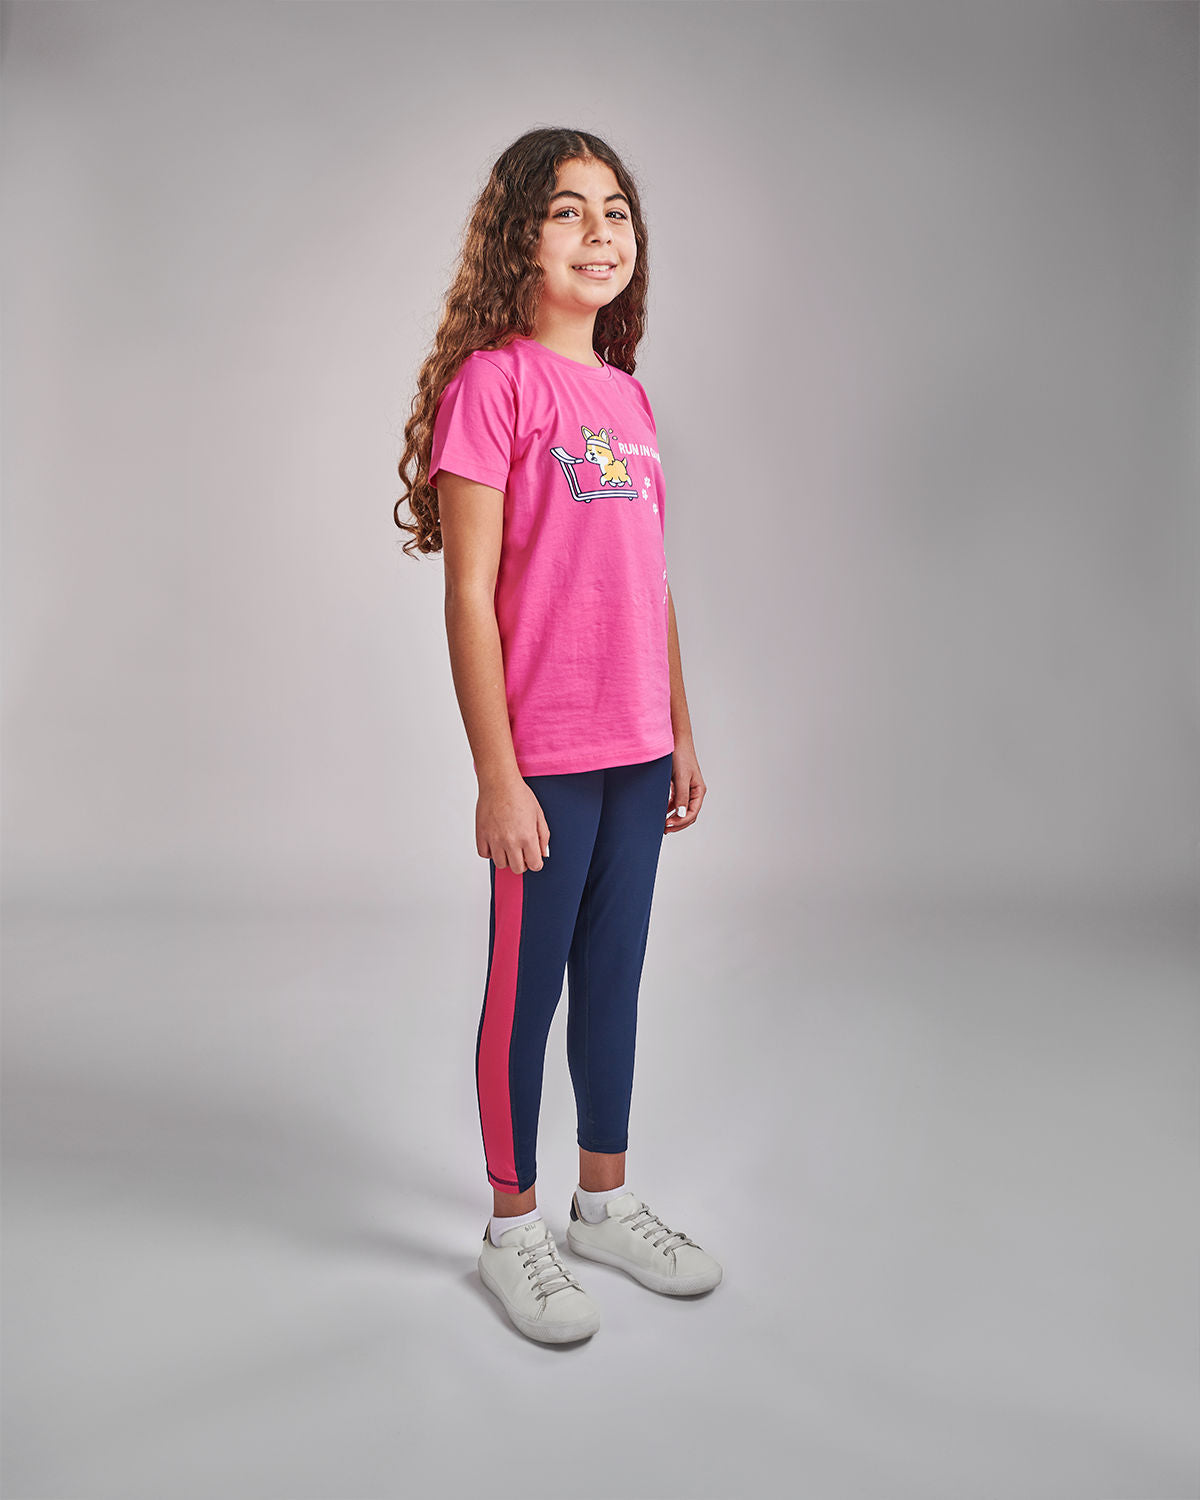 Photo by 𝗔𝗧𝗨𝗠 SPORTSWEAR ® on December 20, 2022. May be an image of 1 girl wears navy/pink leggings with atum emblem, and pink t-shirt.